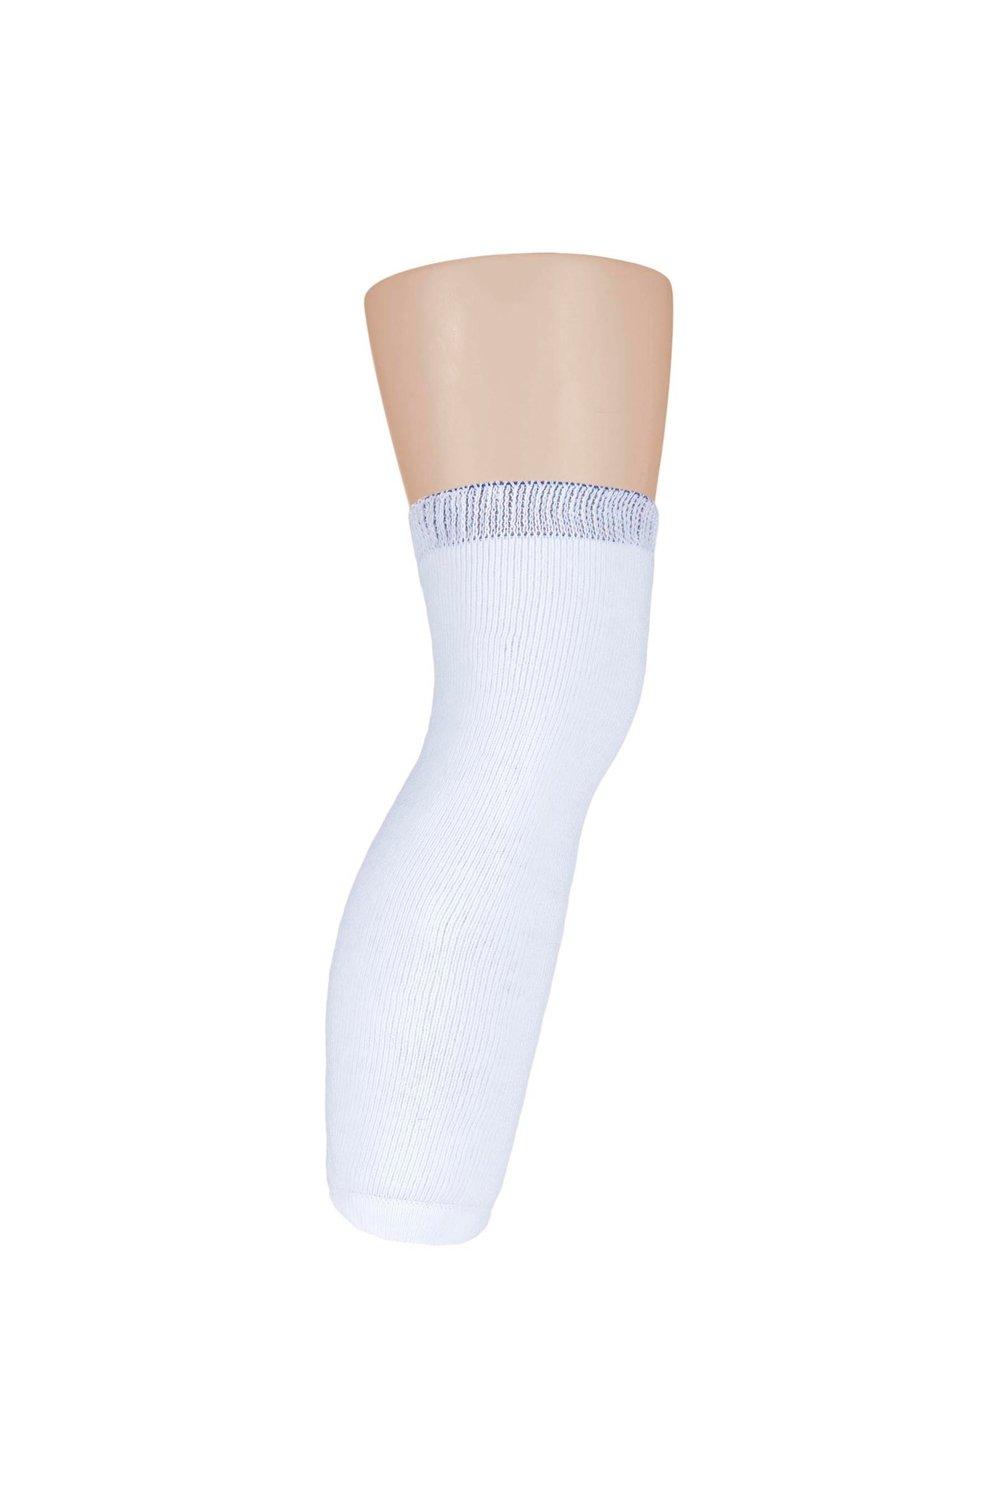 6 Pack Prosthetic Socks for Below the Knee Amputees